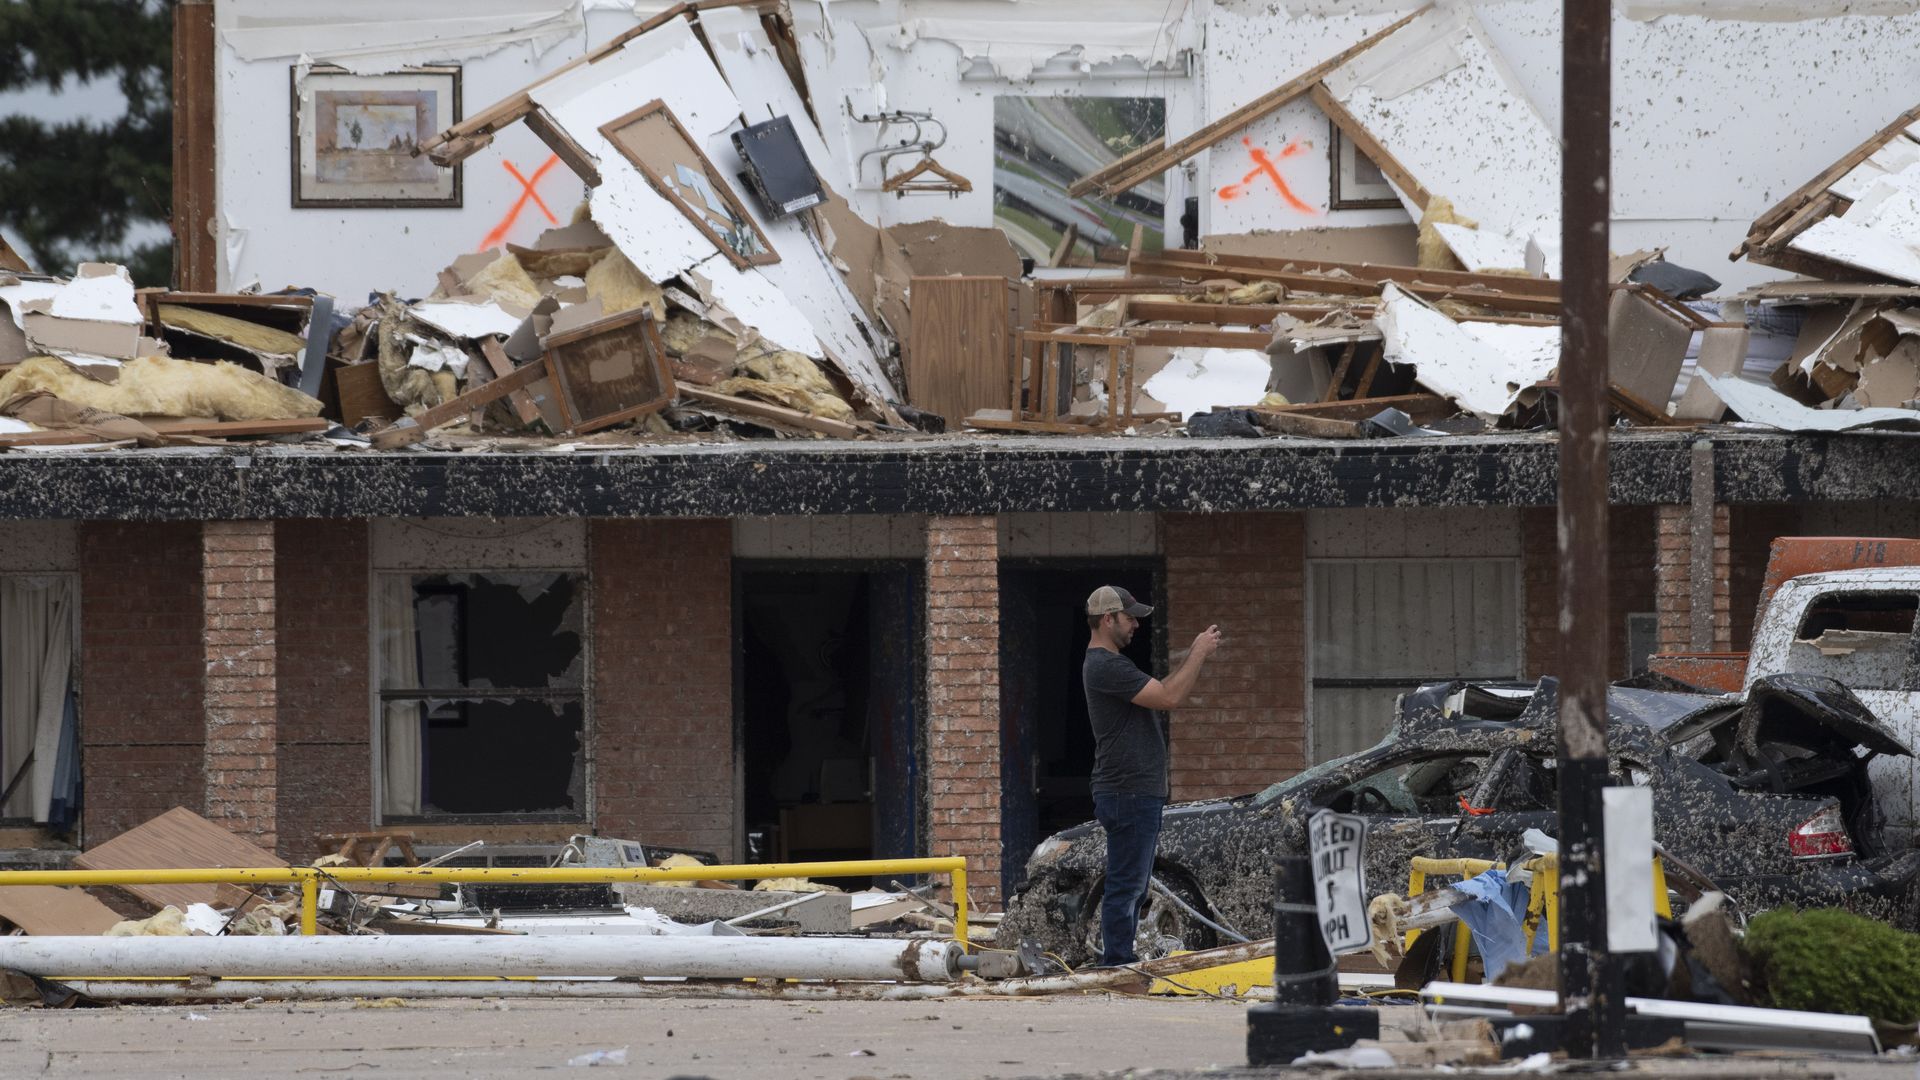 A rescue worker takes photos of the American Value Budget Inn May 26, 2019 in El Reno, Oklahoma. 